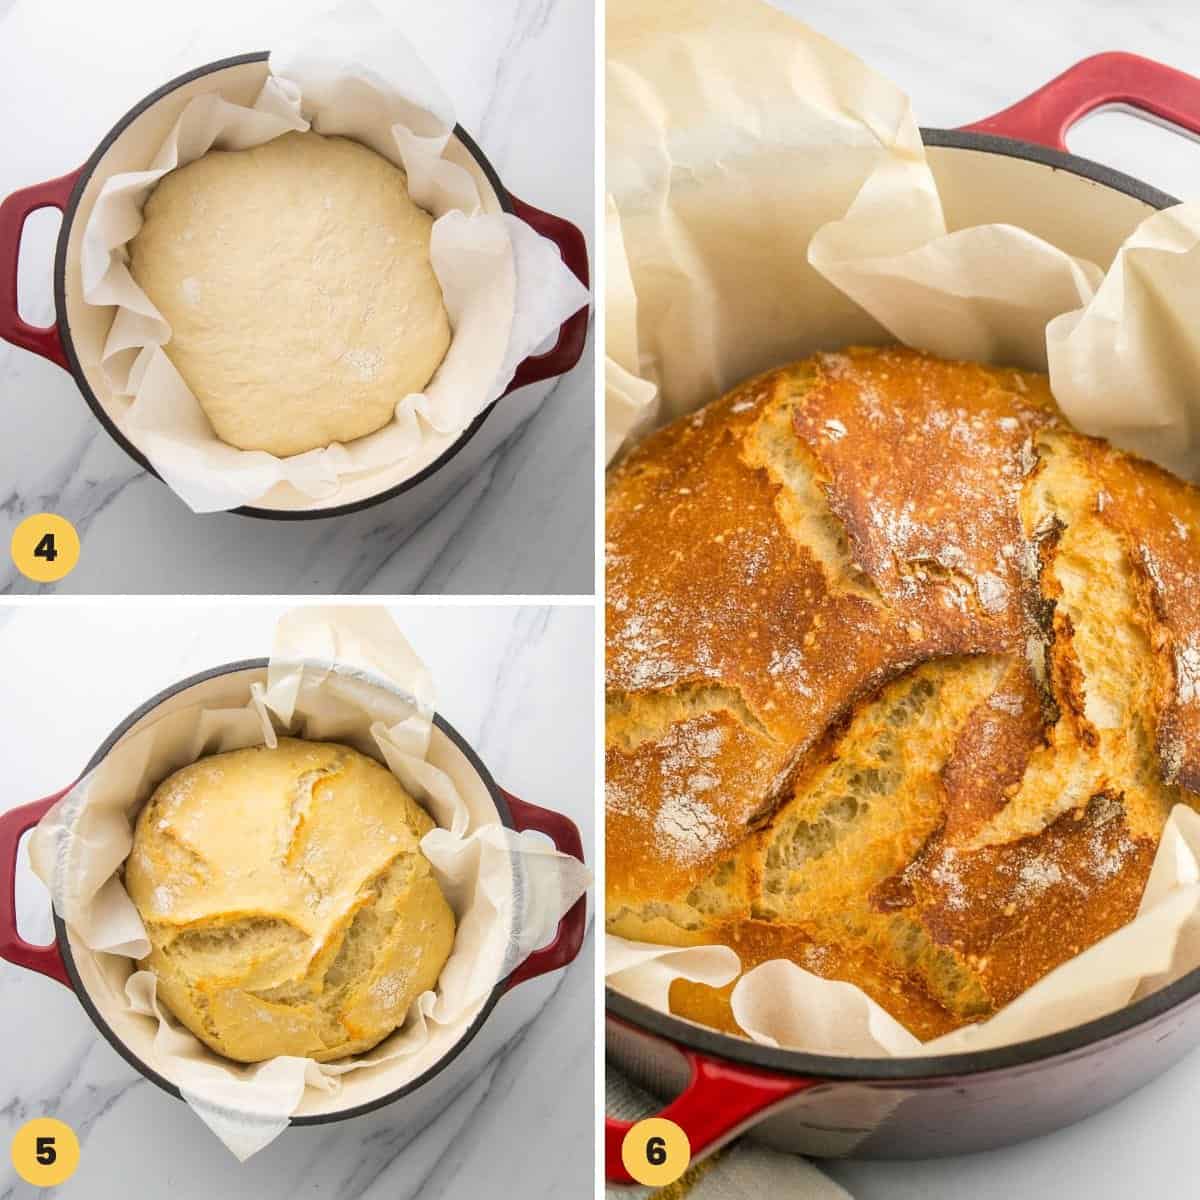 the photos to show how to bake bread in a dutch oven.